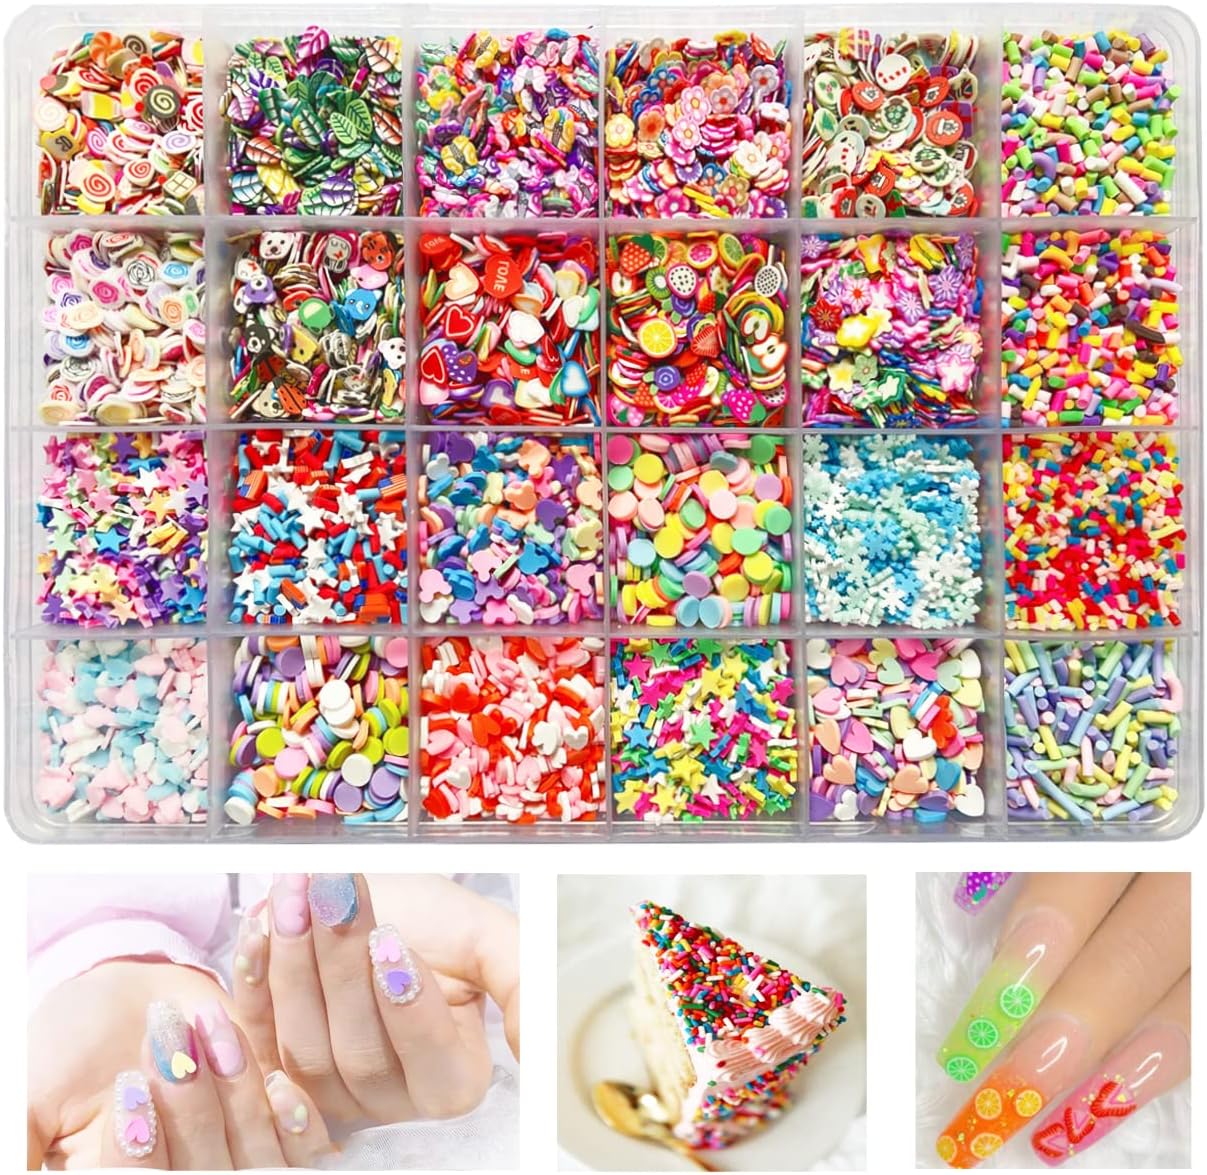 CCINEE 3D Fruit Nail Slices,Assorted Polymer Clay Slime Slices Bulk for DIY  Crafts Supplies,4000PCS,1/4 Inch